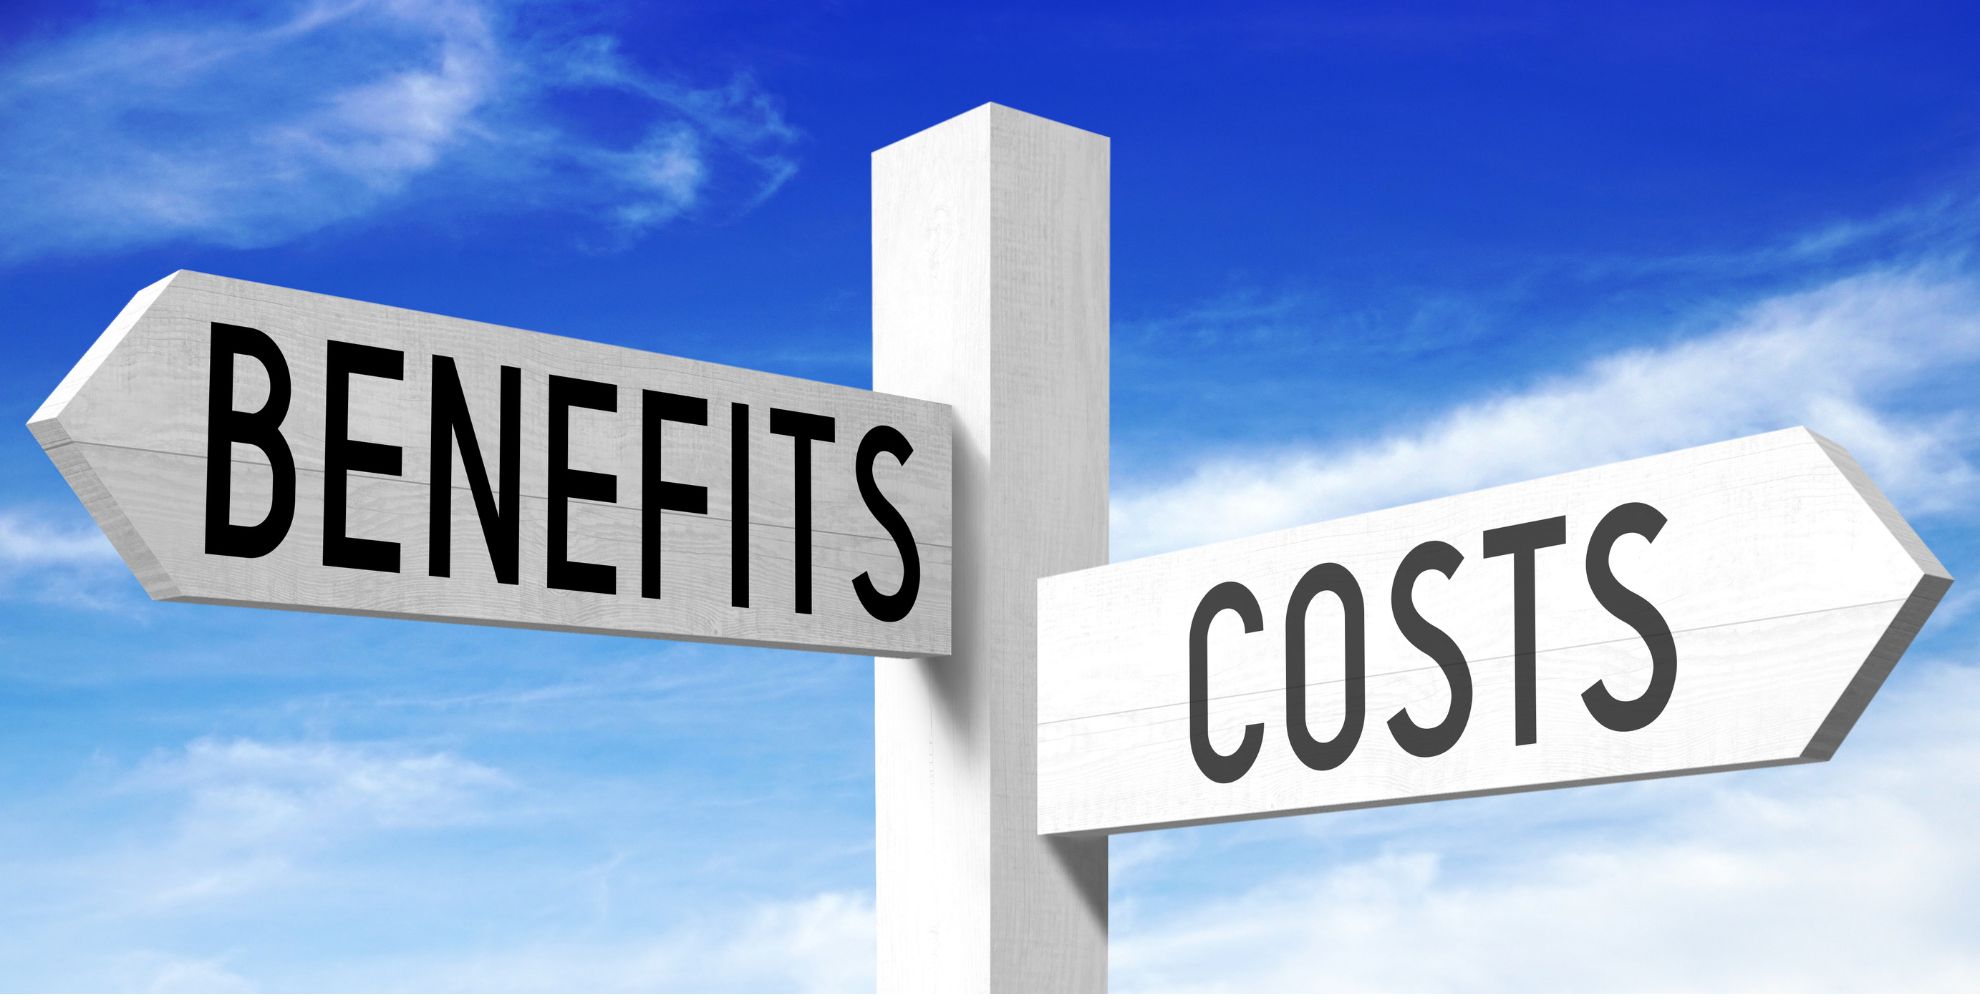 Image of a signpost with one sign that says "Benefits" pointing in one direction, and another that says "Costs" pointing in another direction